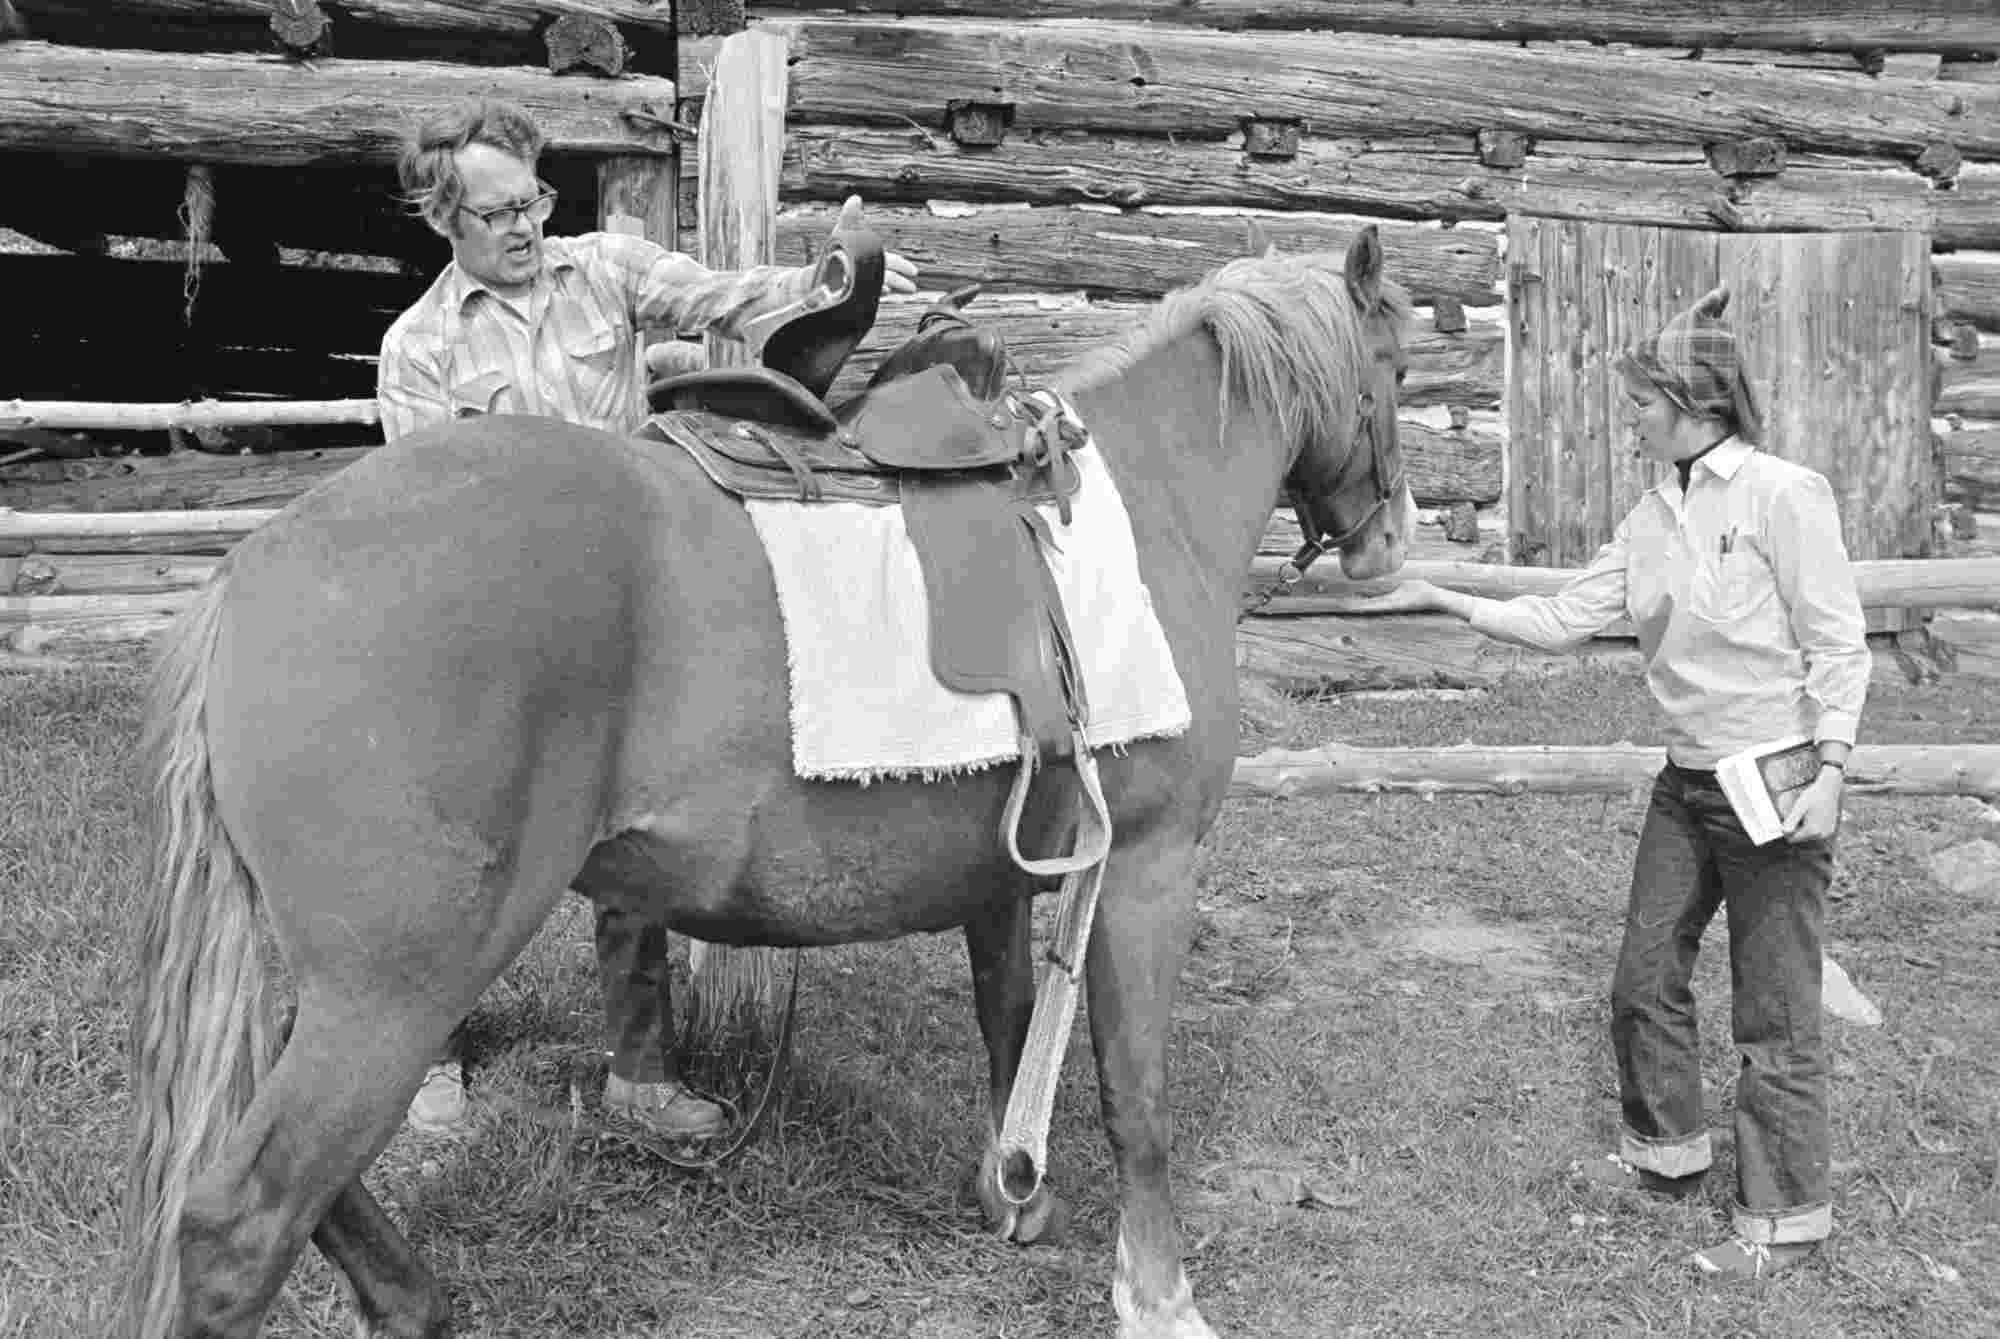 Black and white archival photo of Russell Peck saddling a horse with a student nearby.